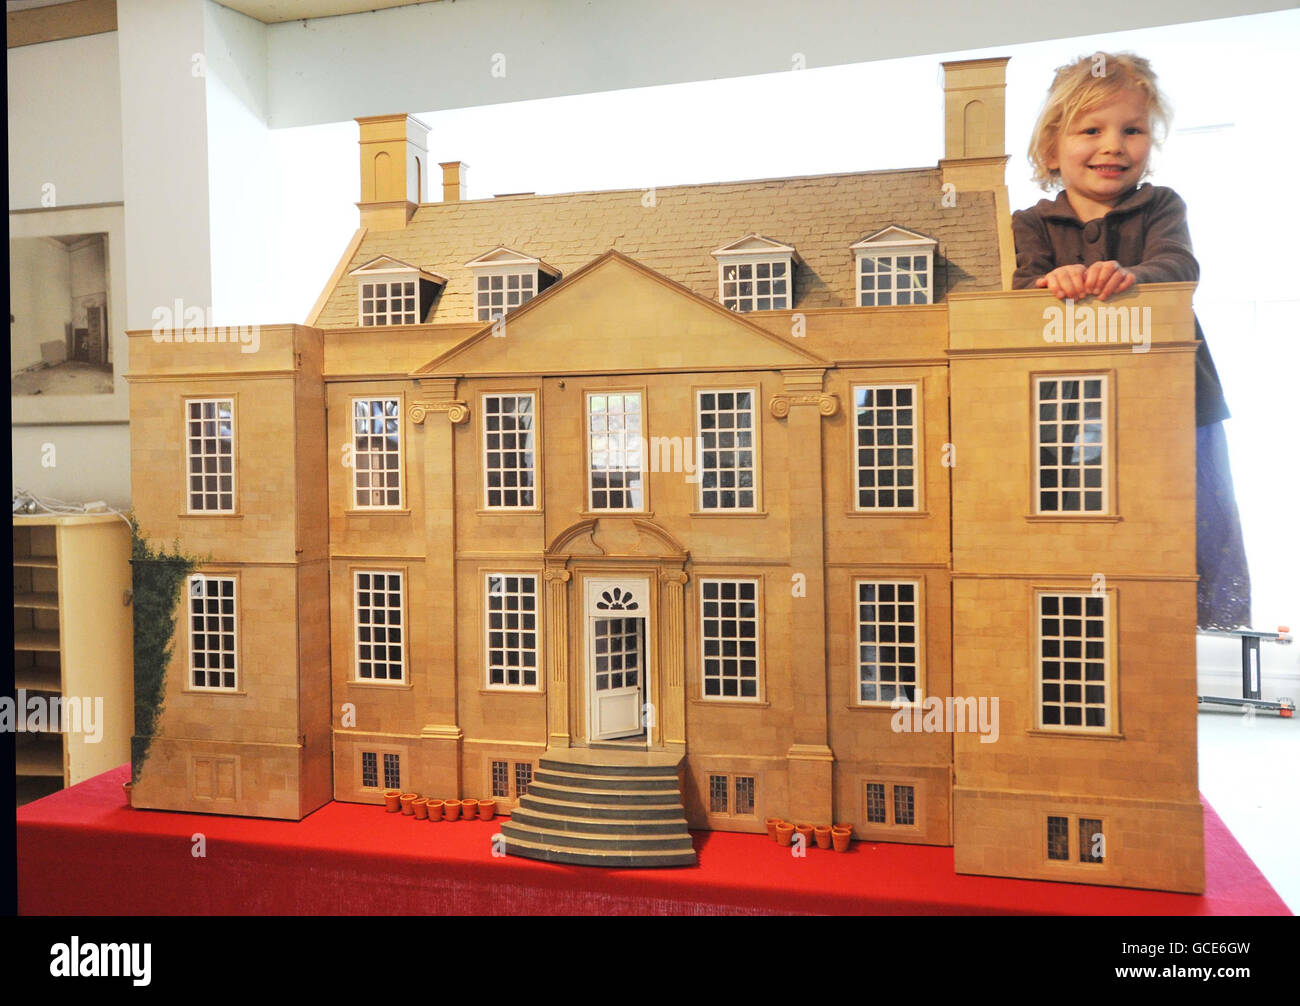 Emilia Hampton, who celebrated her 6th birthday today, with a 1:12th scale doll's house, modelled on Bourton House. The 24-room doll's house, which replicates the lavish interior of the celebrated country manor, is expected to fetch up to 3,000 at auction. Stock Photo